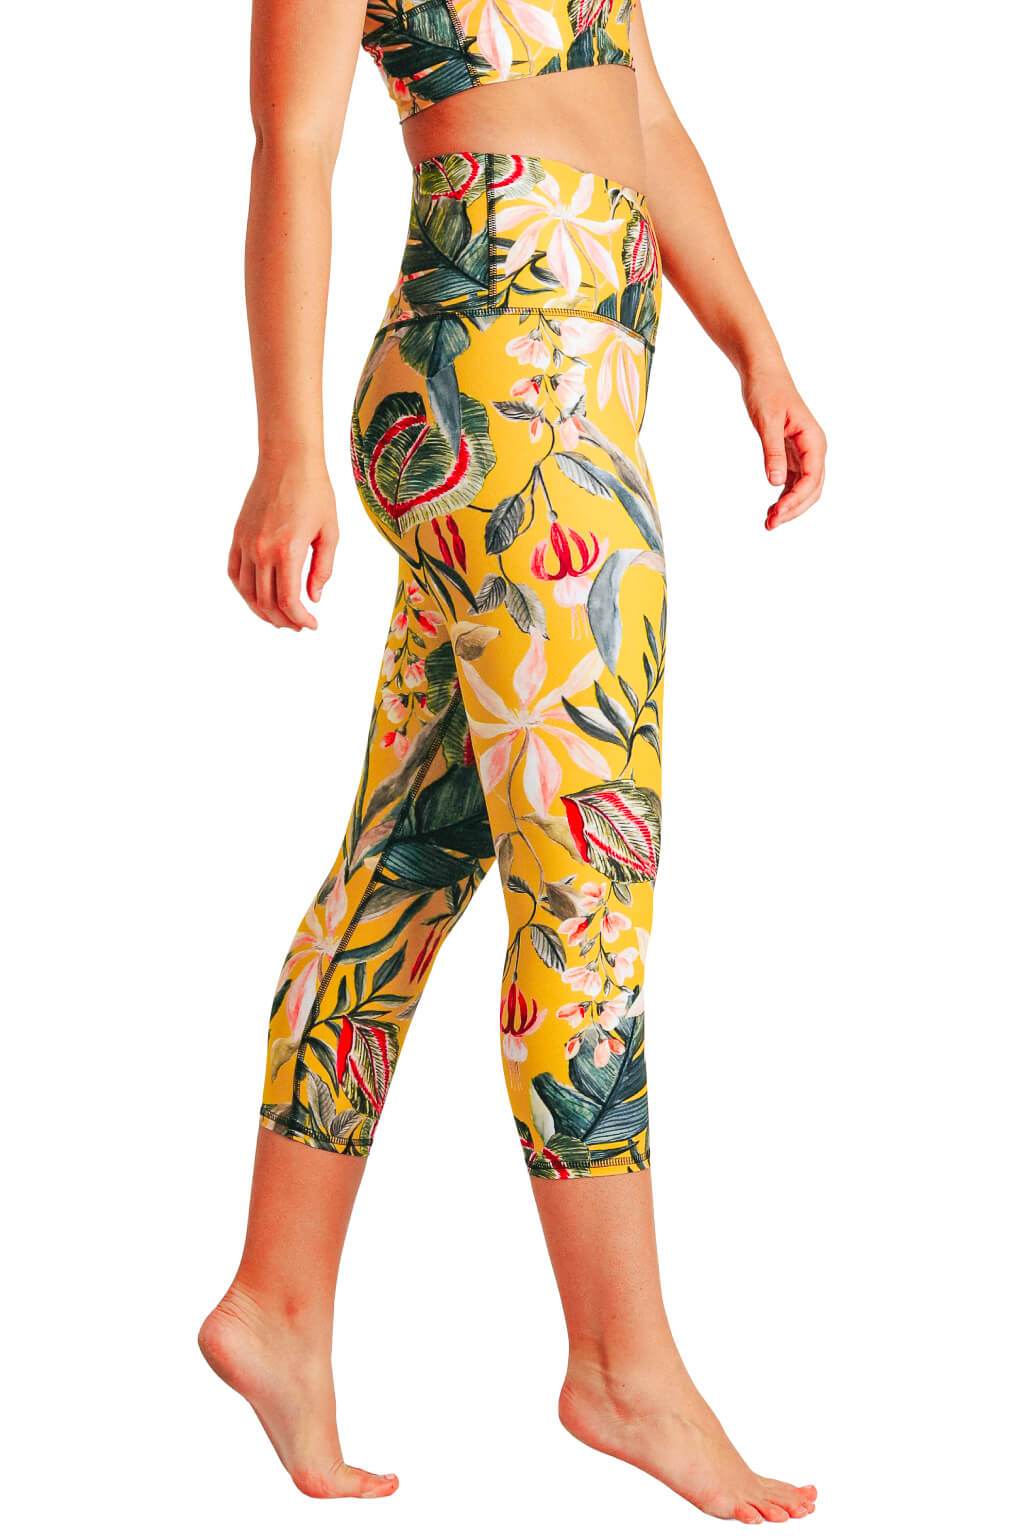 Yoga Democracy Leggings Review Pdf  International Society of Precision  Agriculture